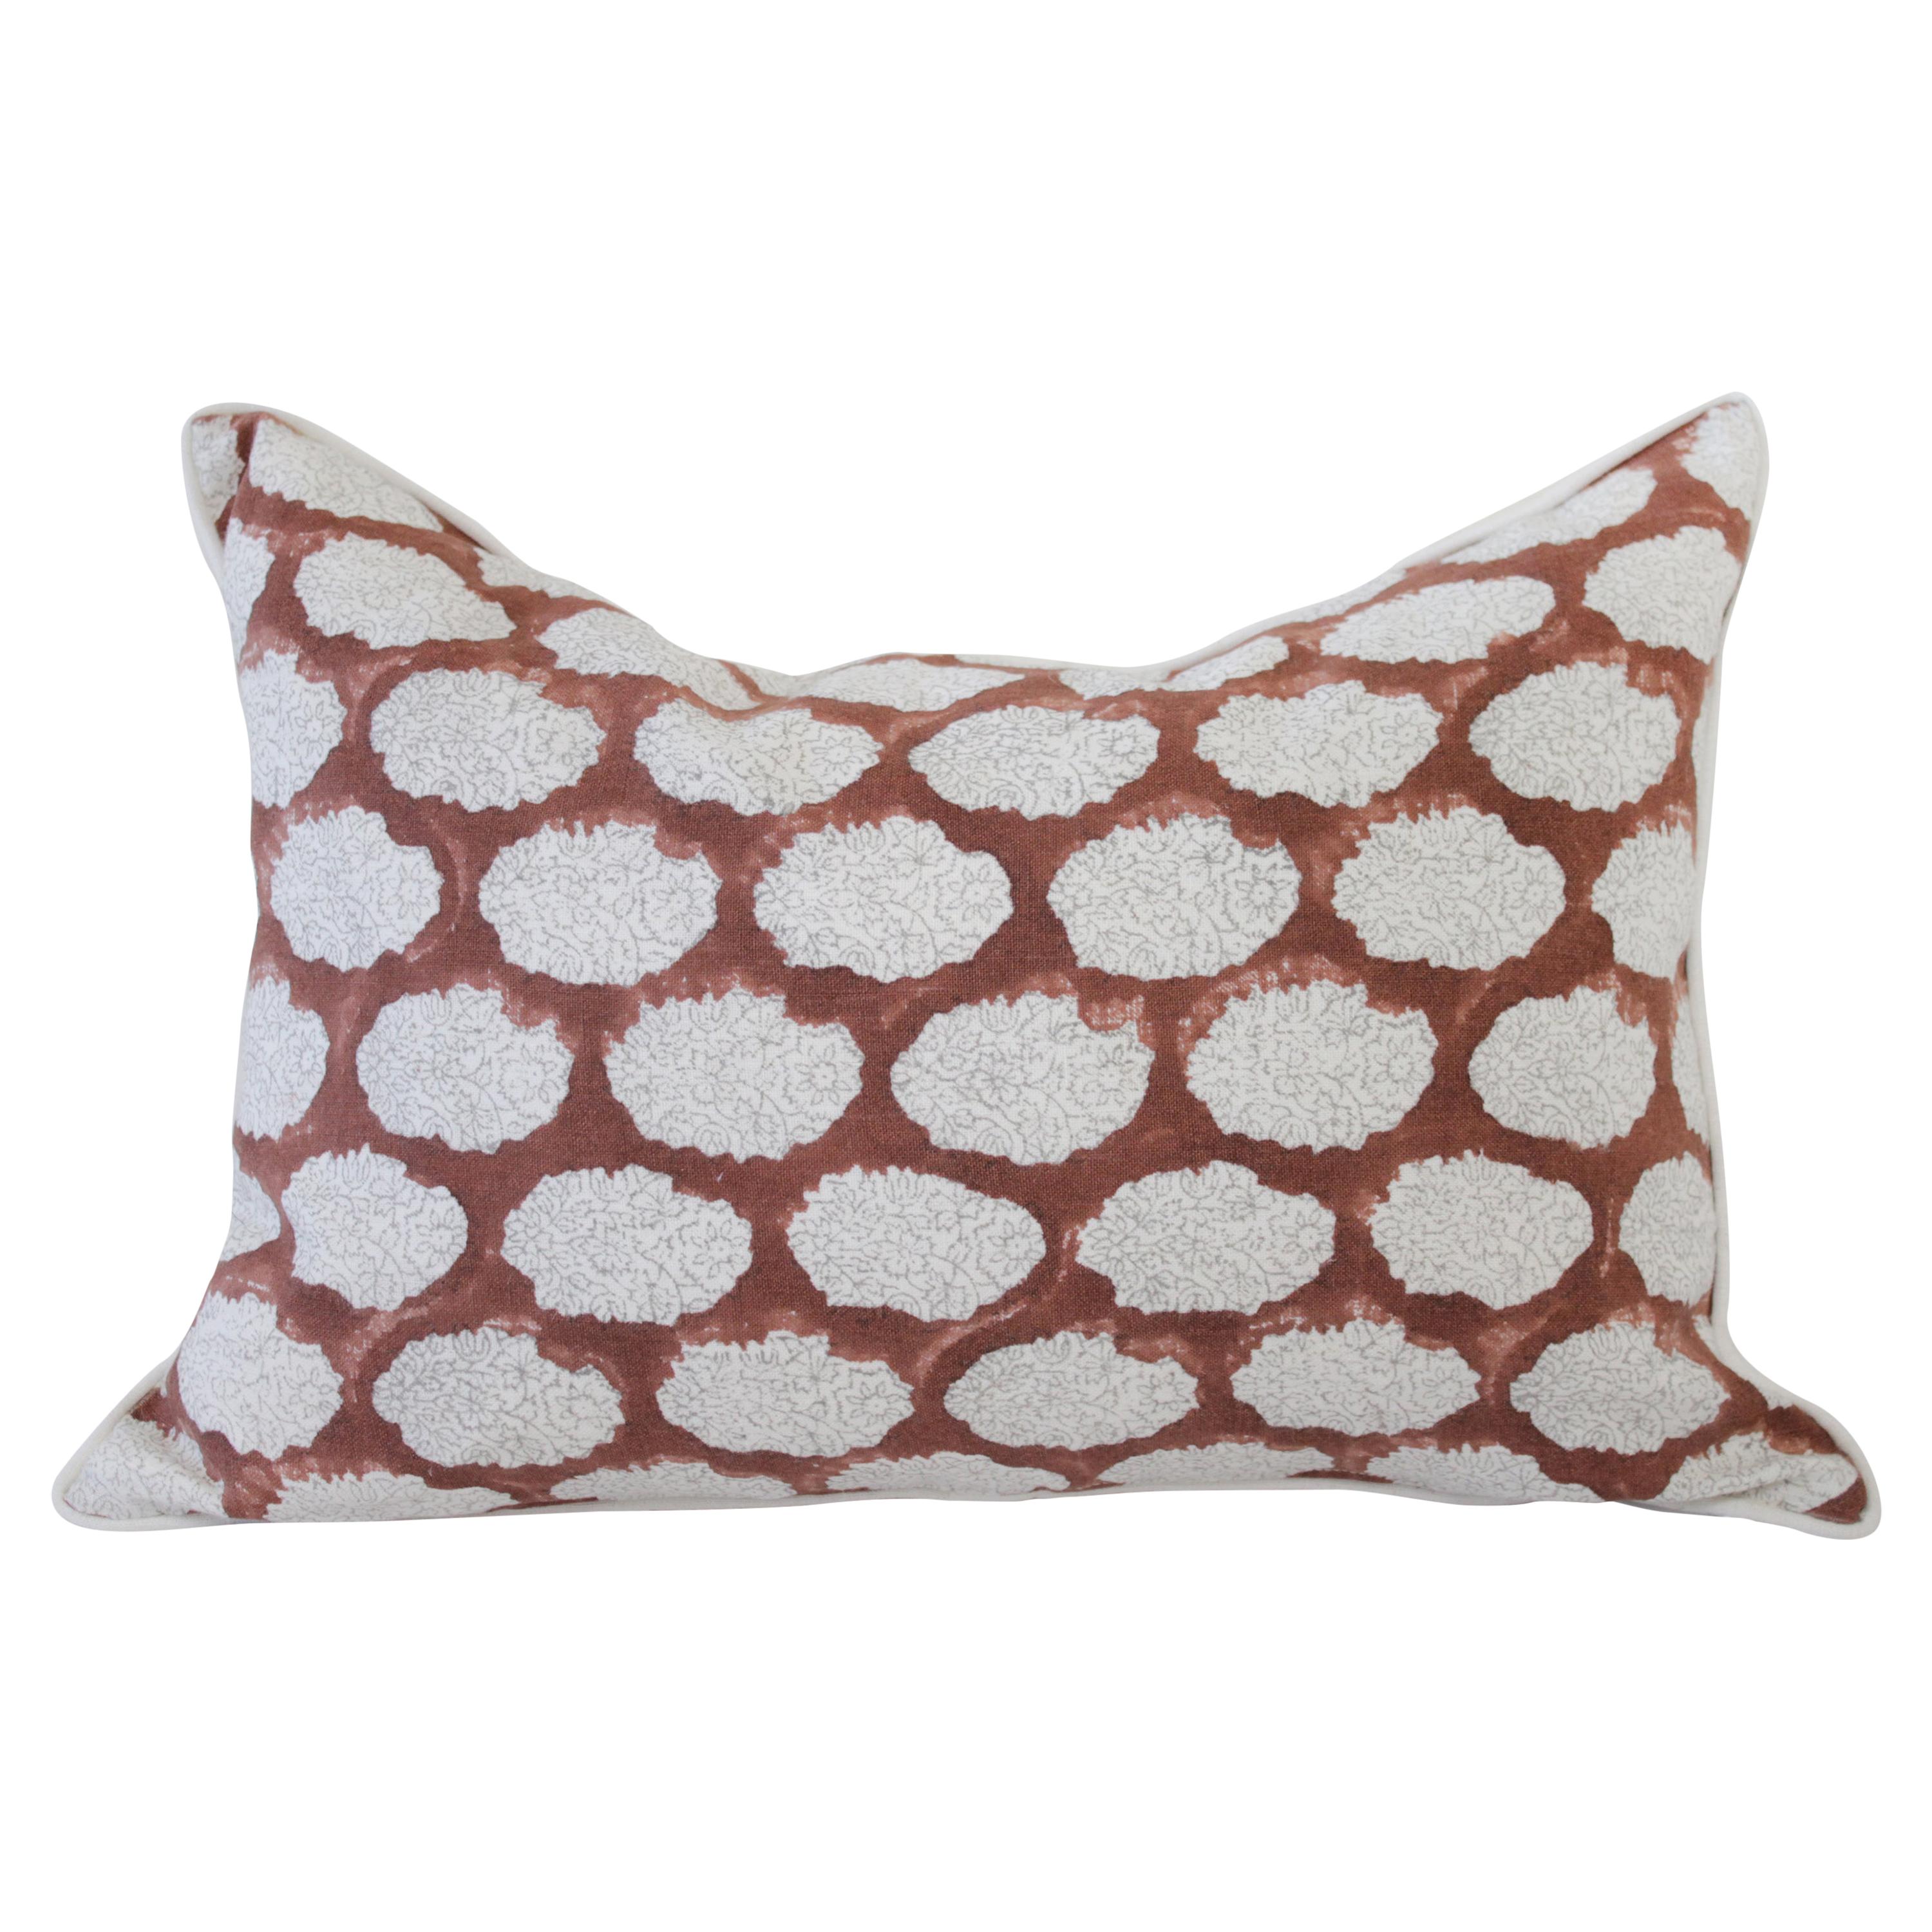 Hand Blocked Gray and Rust Color Accent Pillow on White Linen Background